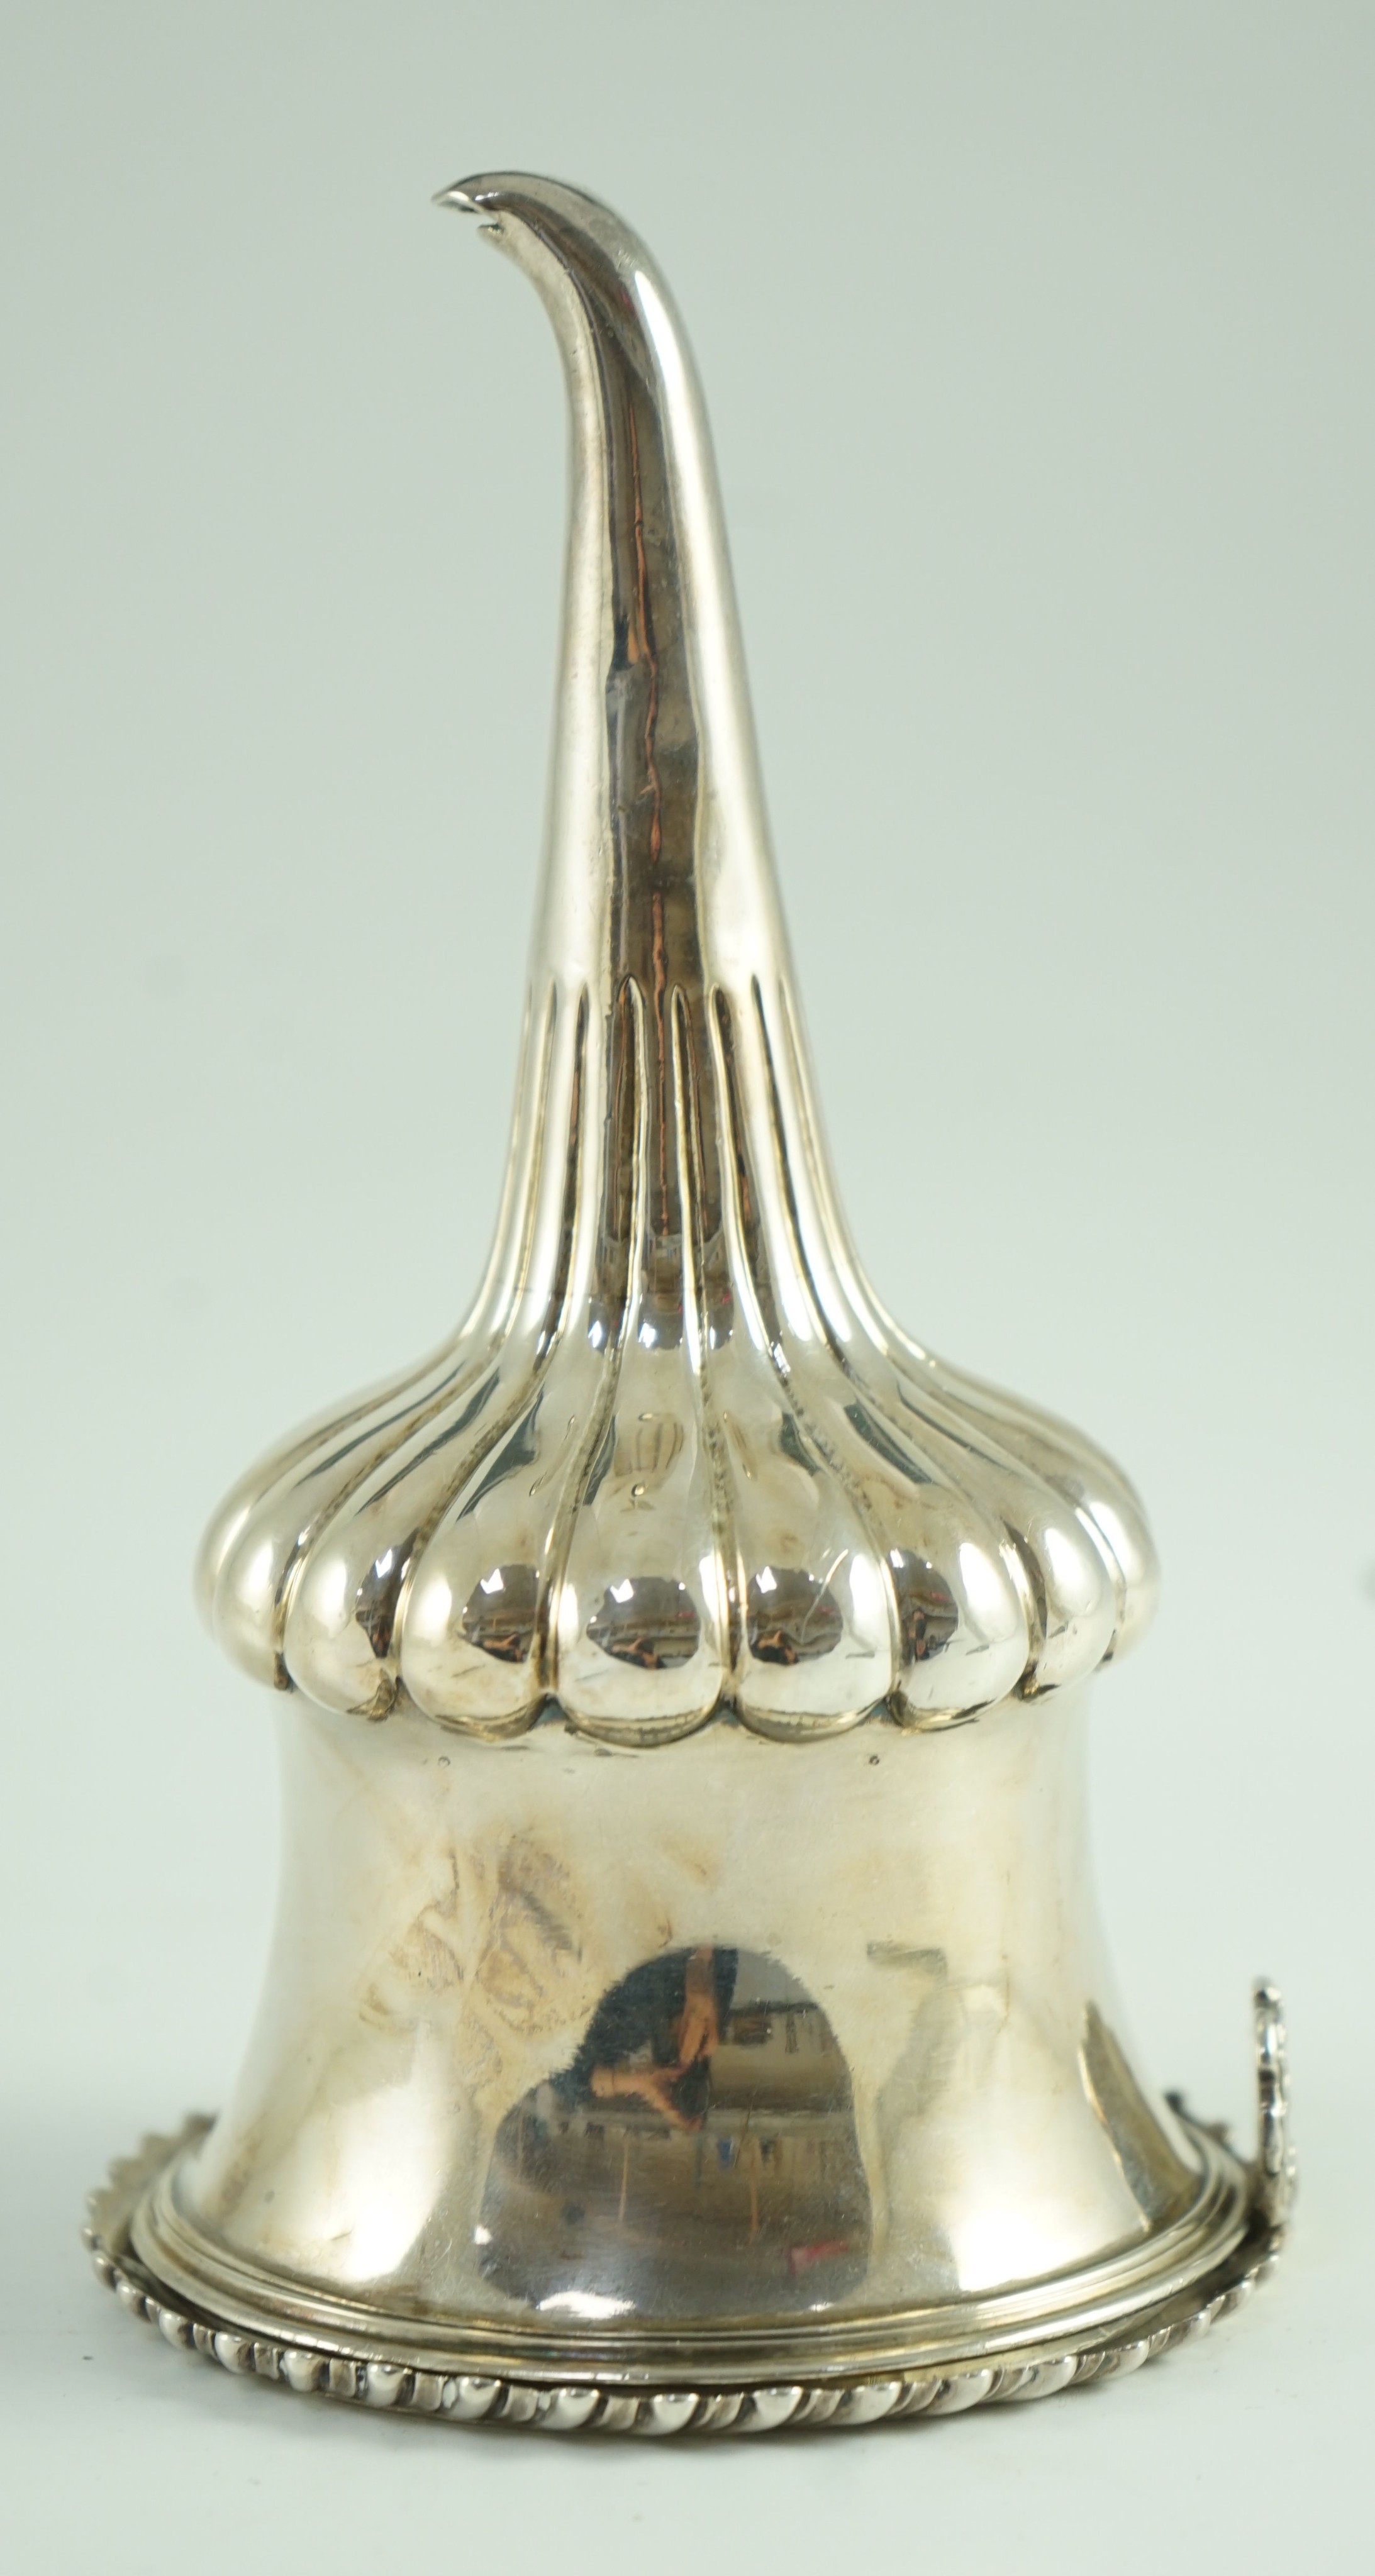 A late George IV silver wine funnel by Charles Fox II